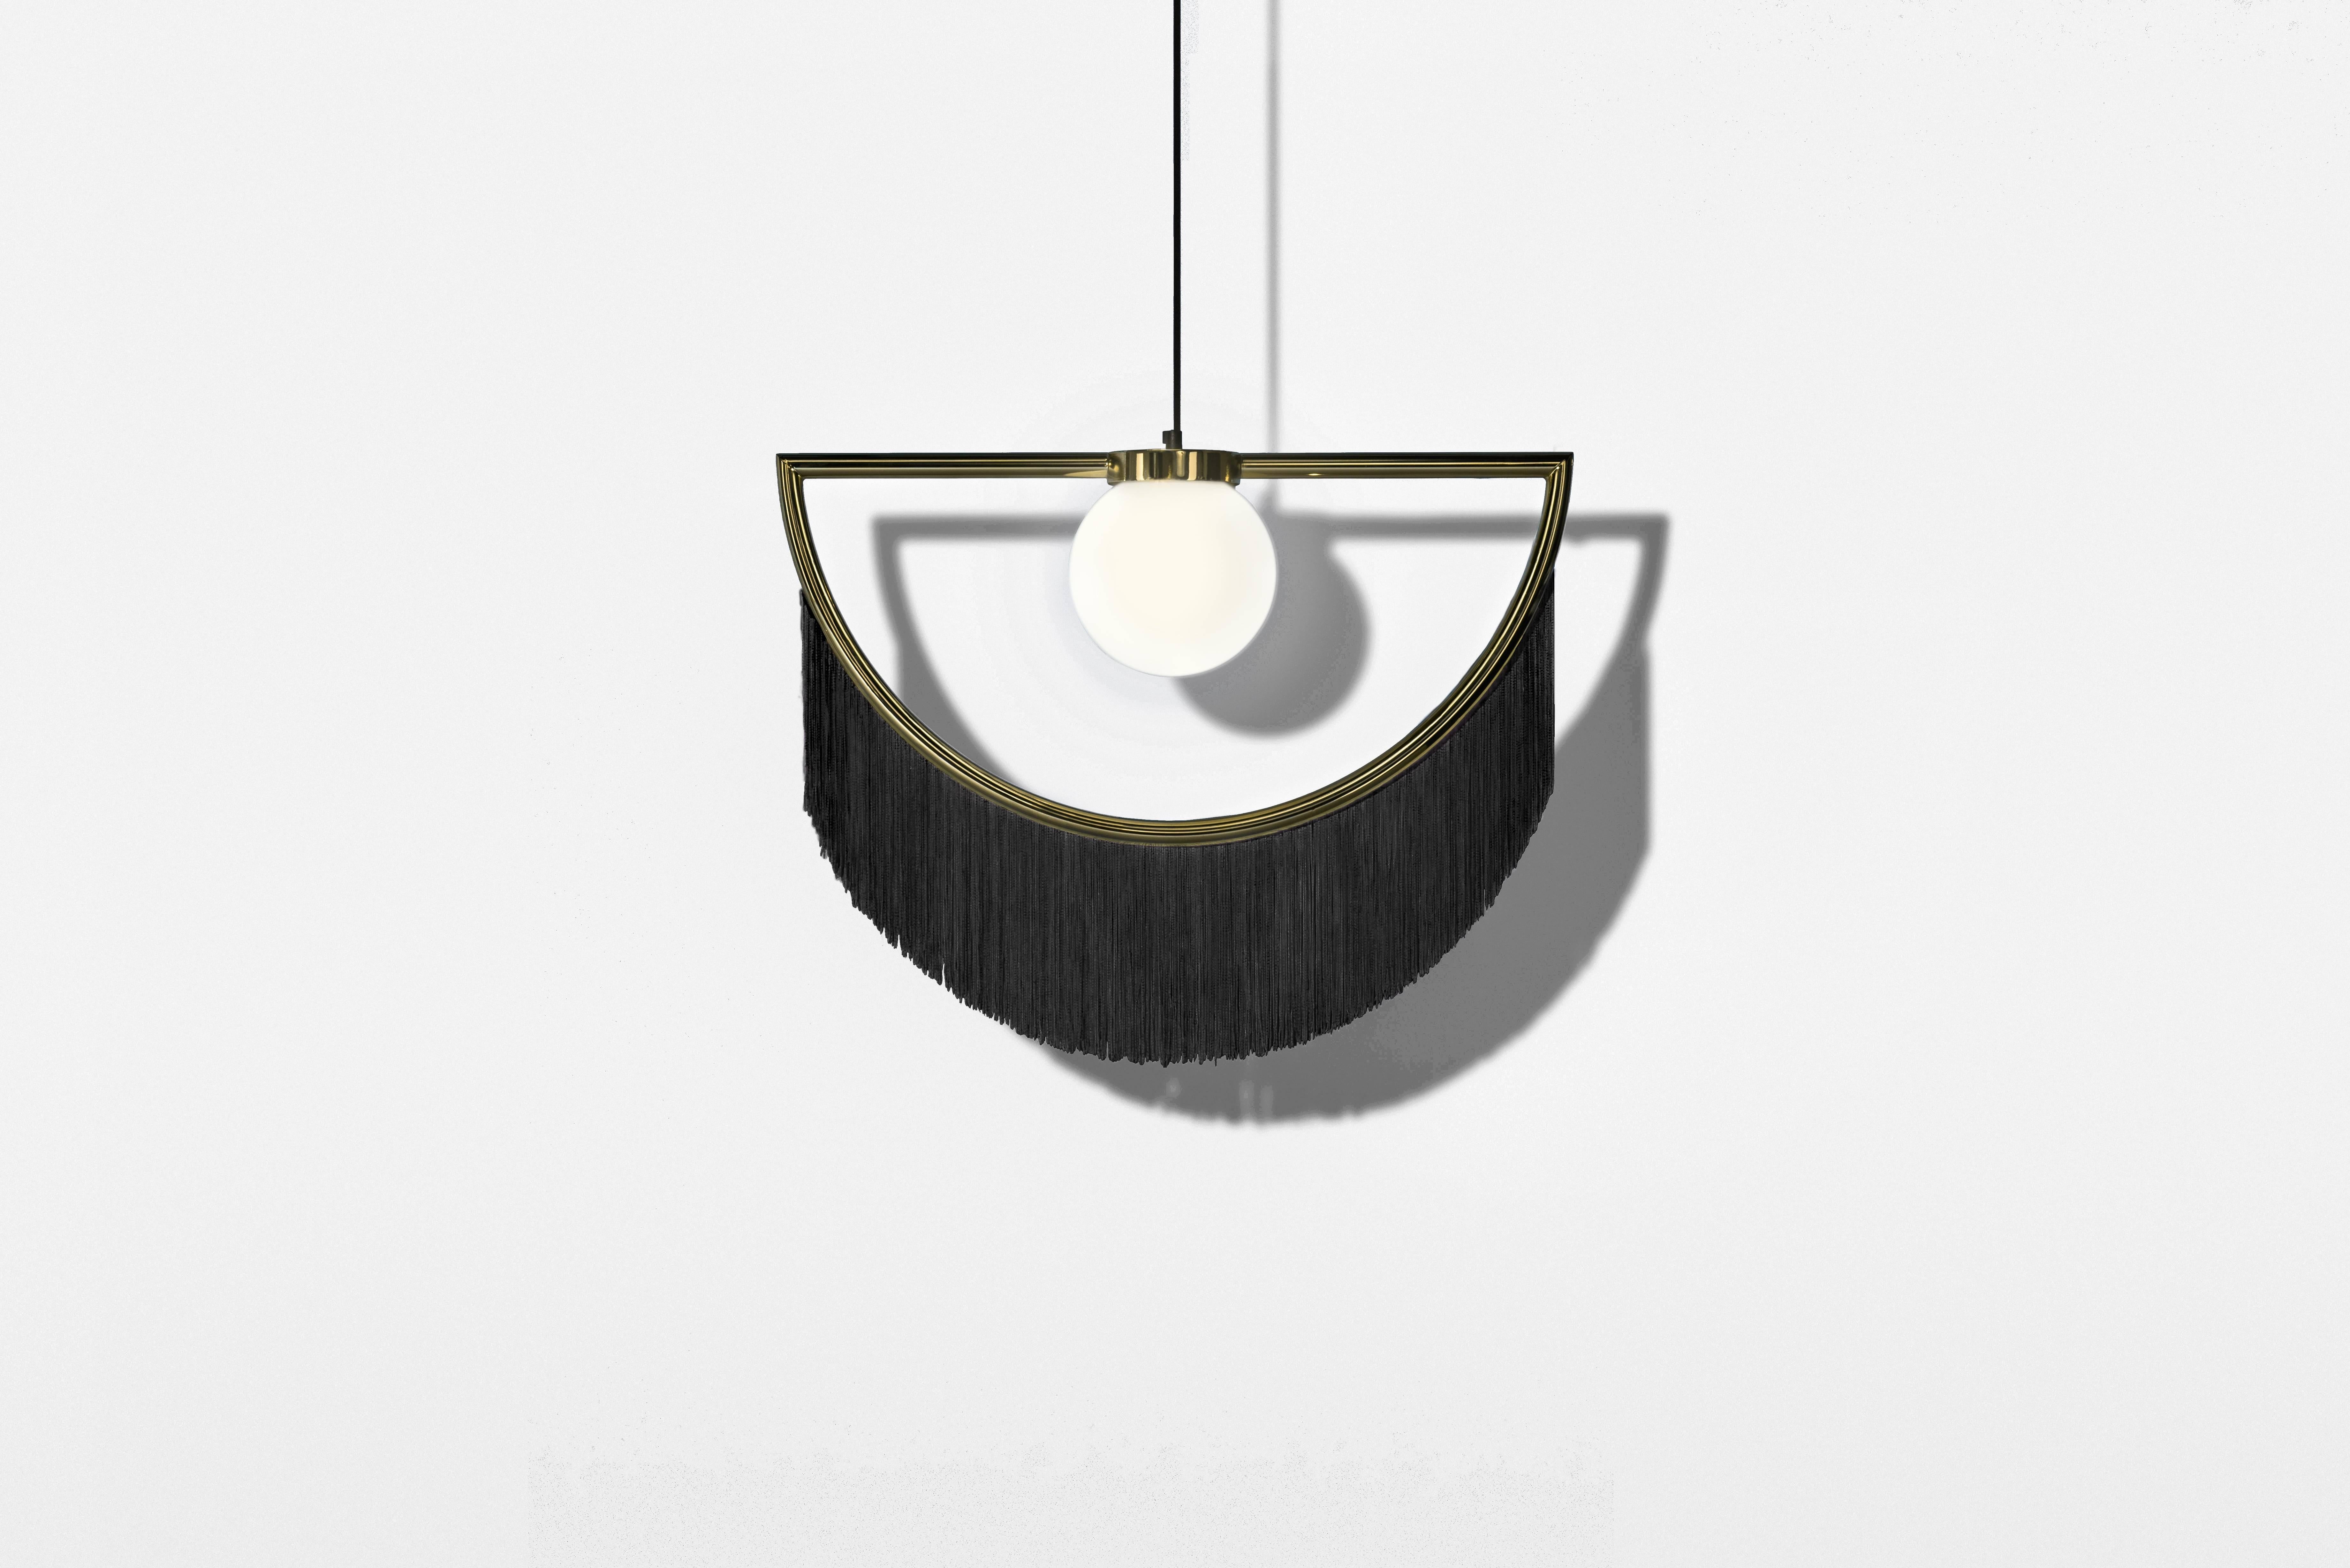 Lamps can wink their eyes, and they can also do it in the most elegant way: with fringes, gold and delicacy. From the collaboration of Masquespacio and Houtique appears Wink, a lamp that brings past and future vibes at the same time.

Product